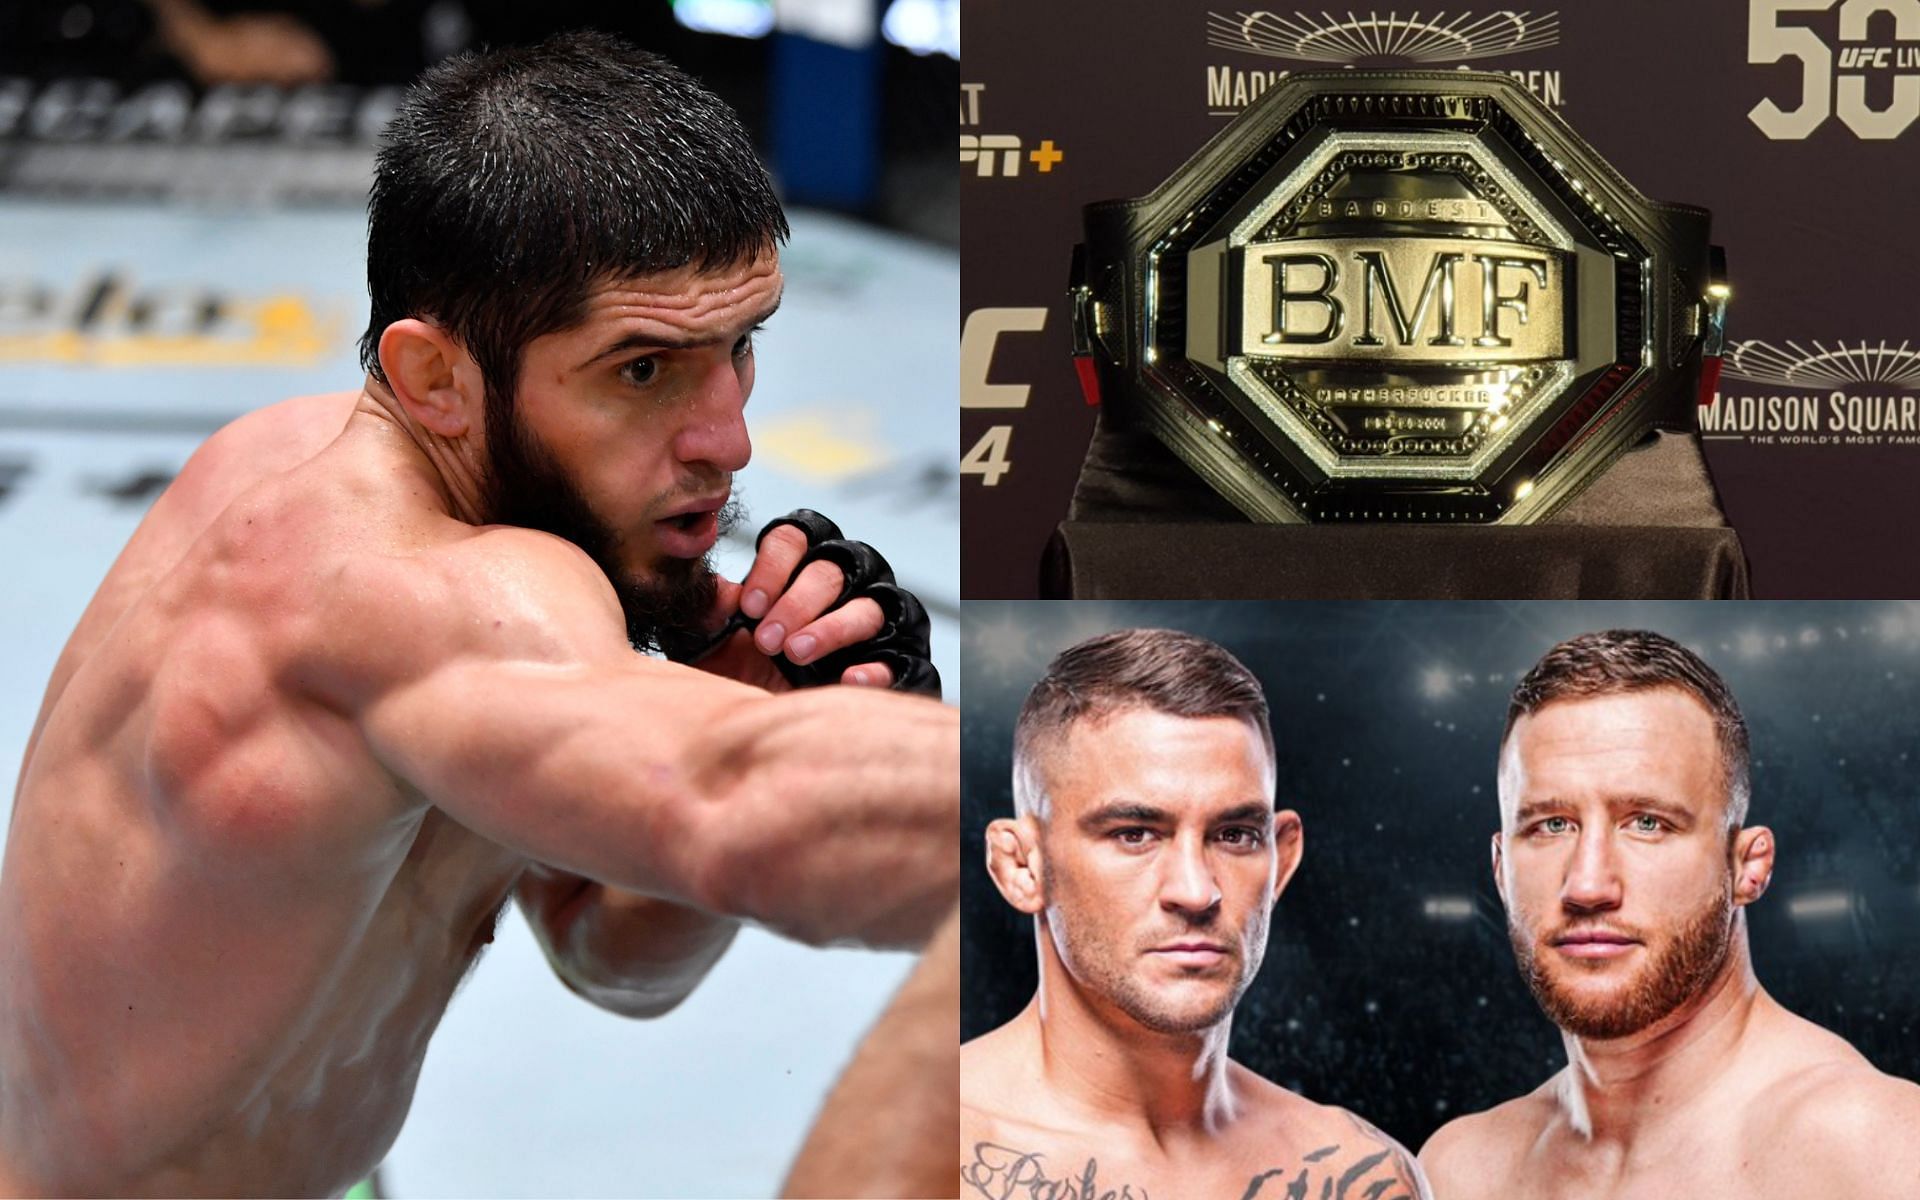 Islam Makhachev (Left); BMF title (Top Right); Dustin Poirier and Justin Gaethje (Bottom Right) [*Image courtesy: left image via Getty Images; right images via @btsportufc and @espnmma Twitter]